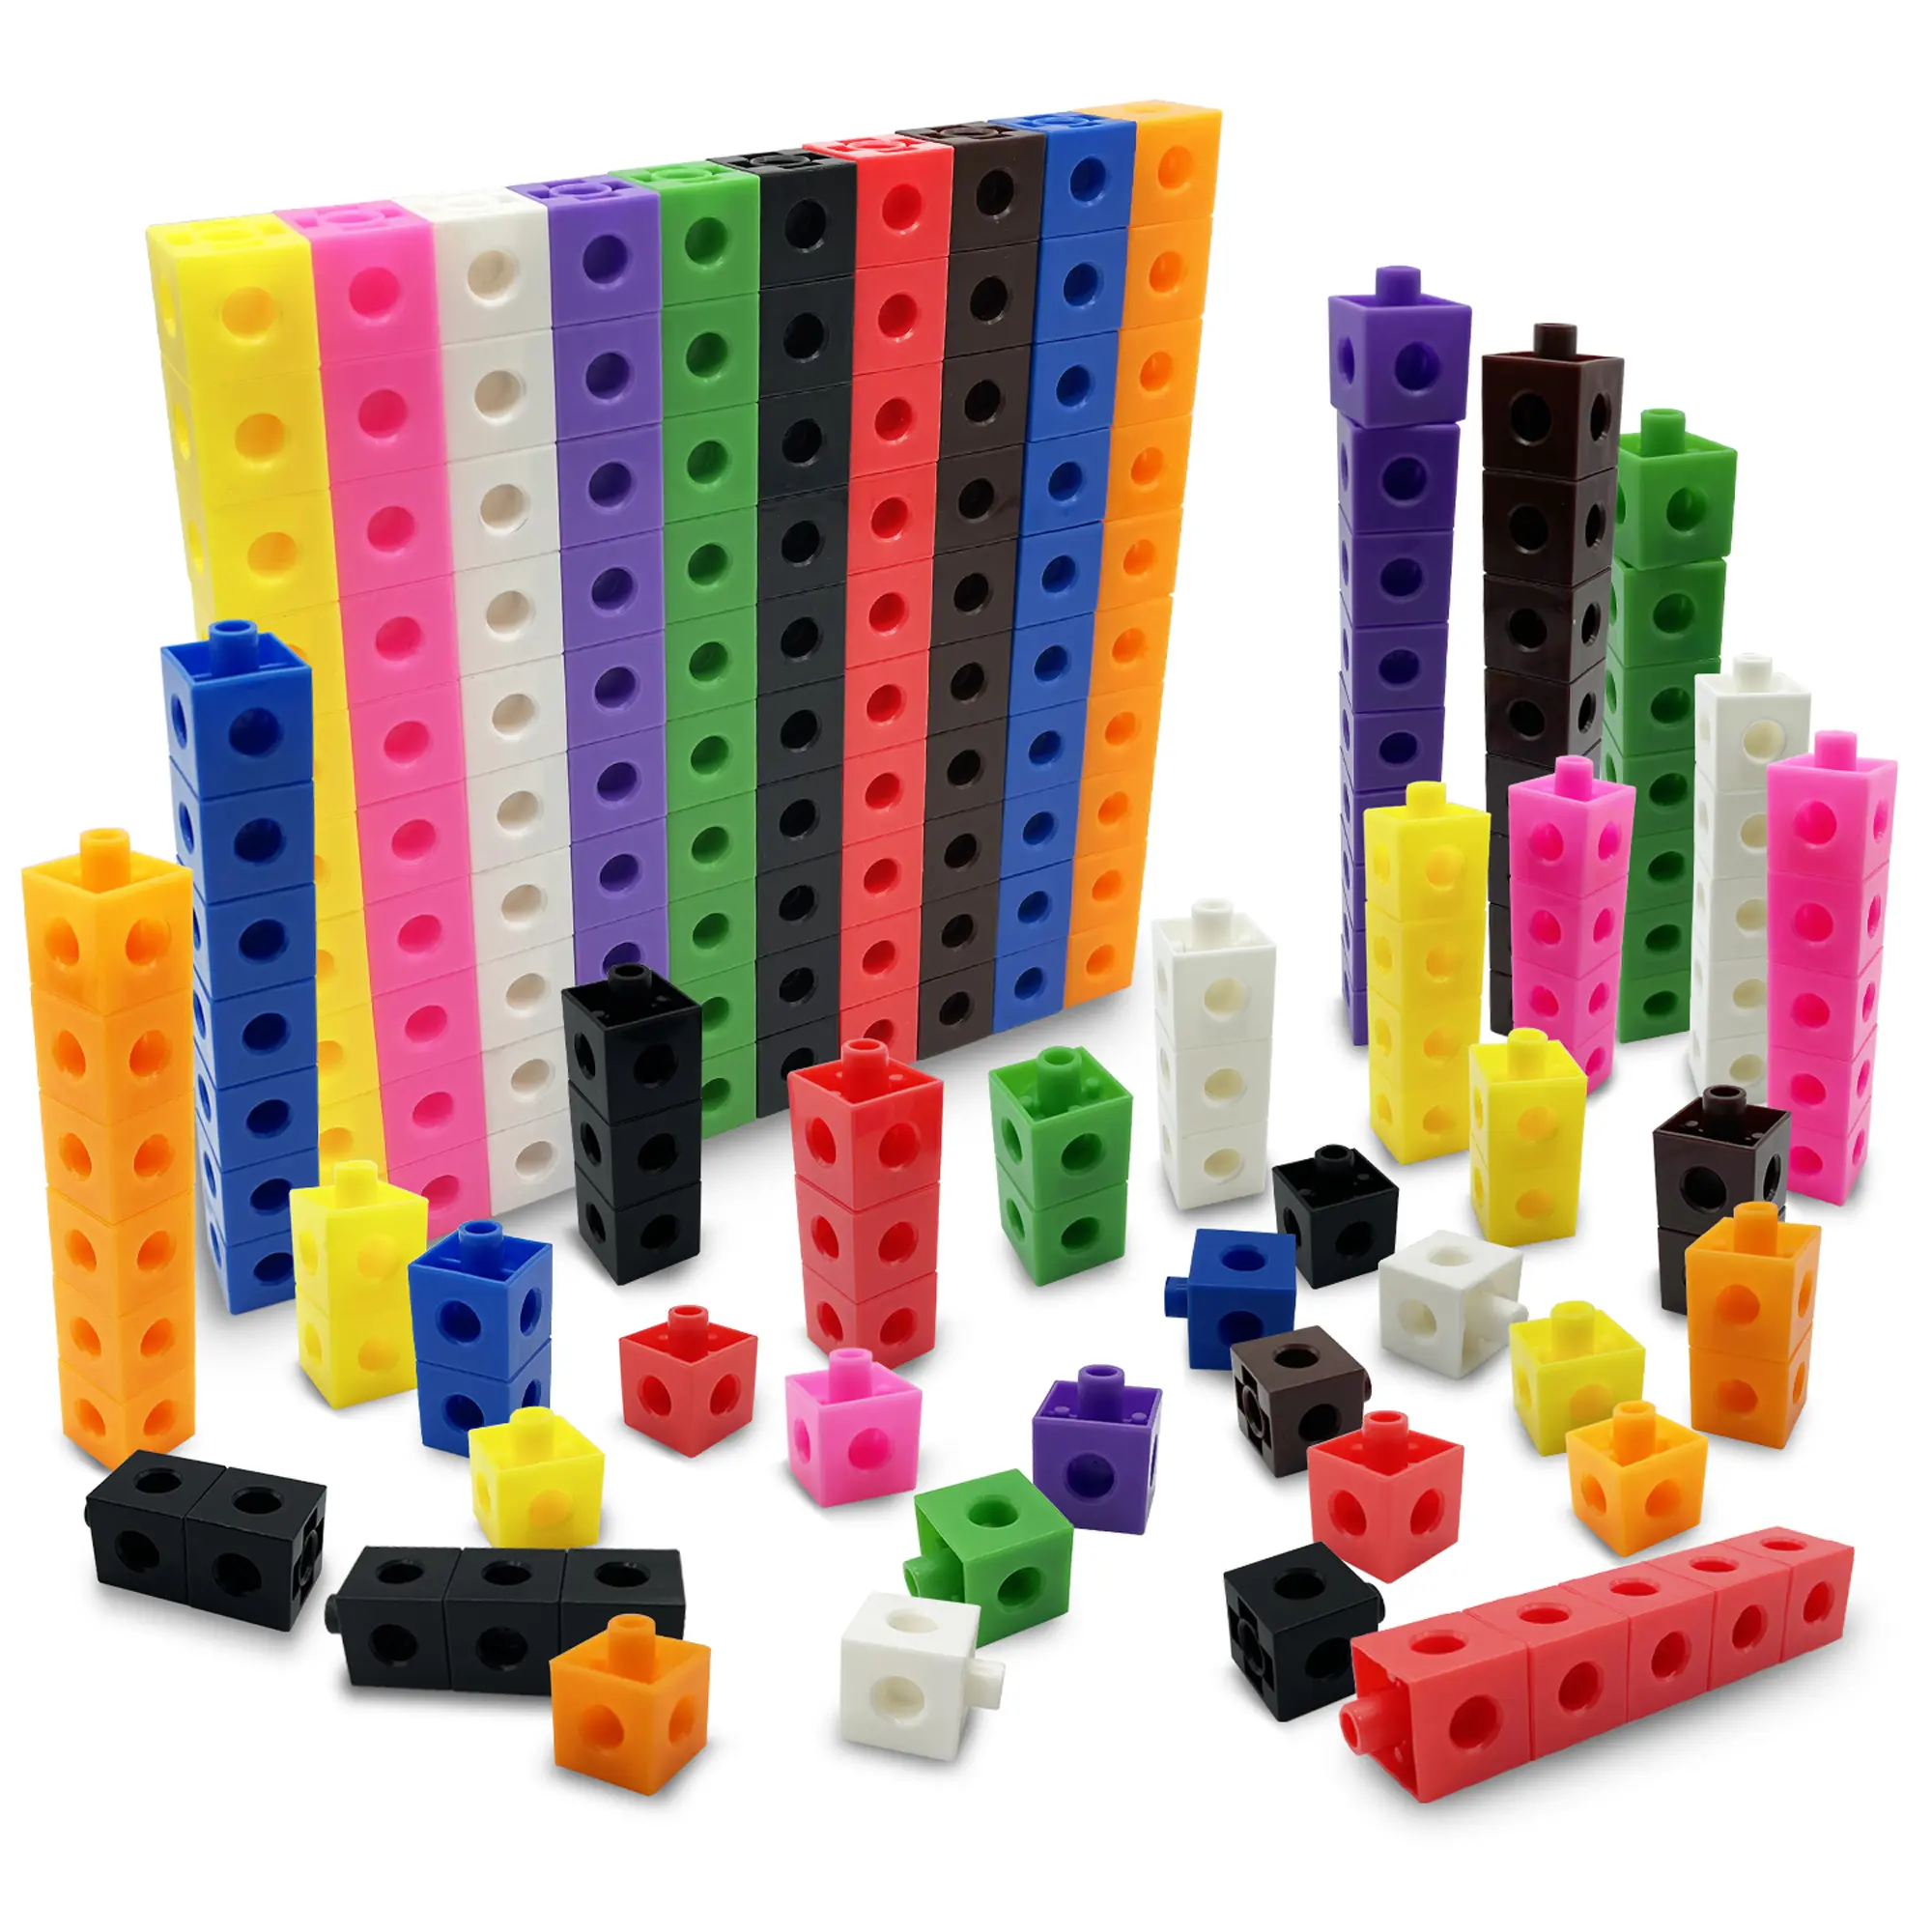 100Pcs 10色Multilink Linking Counting Cubes Snap Blocks Teaching Math Manipulative Kids Early Education Toy